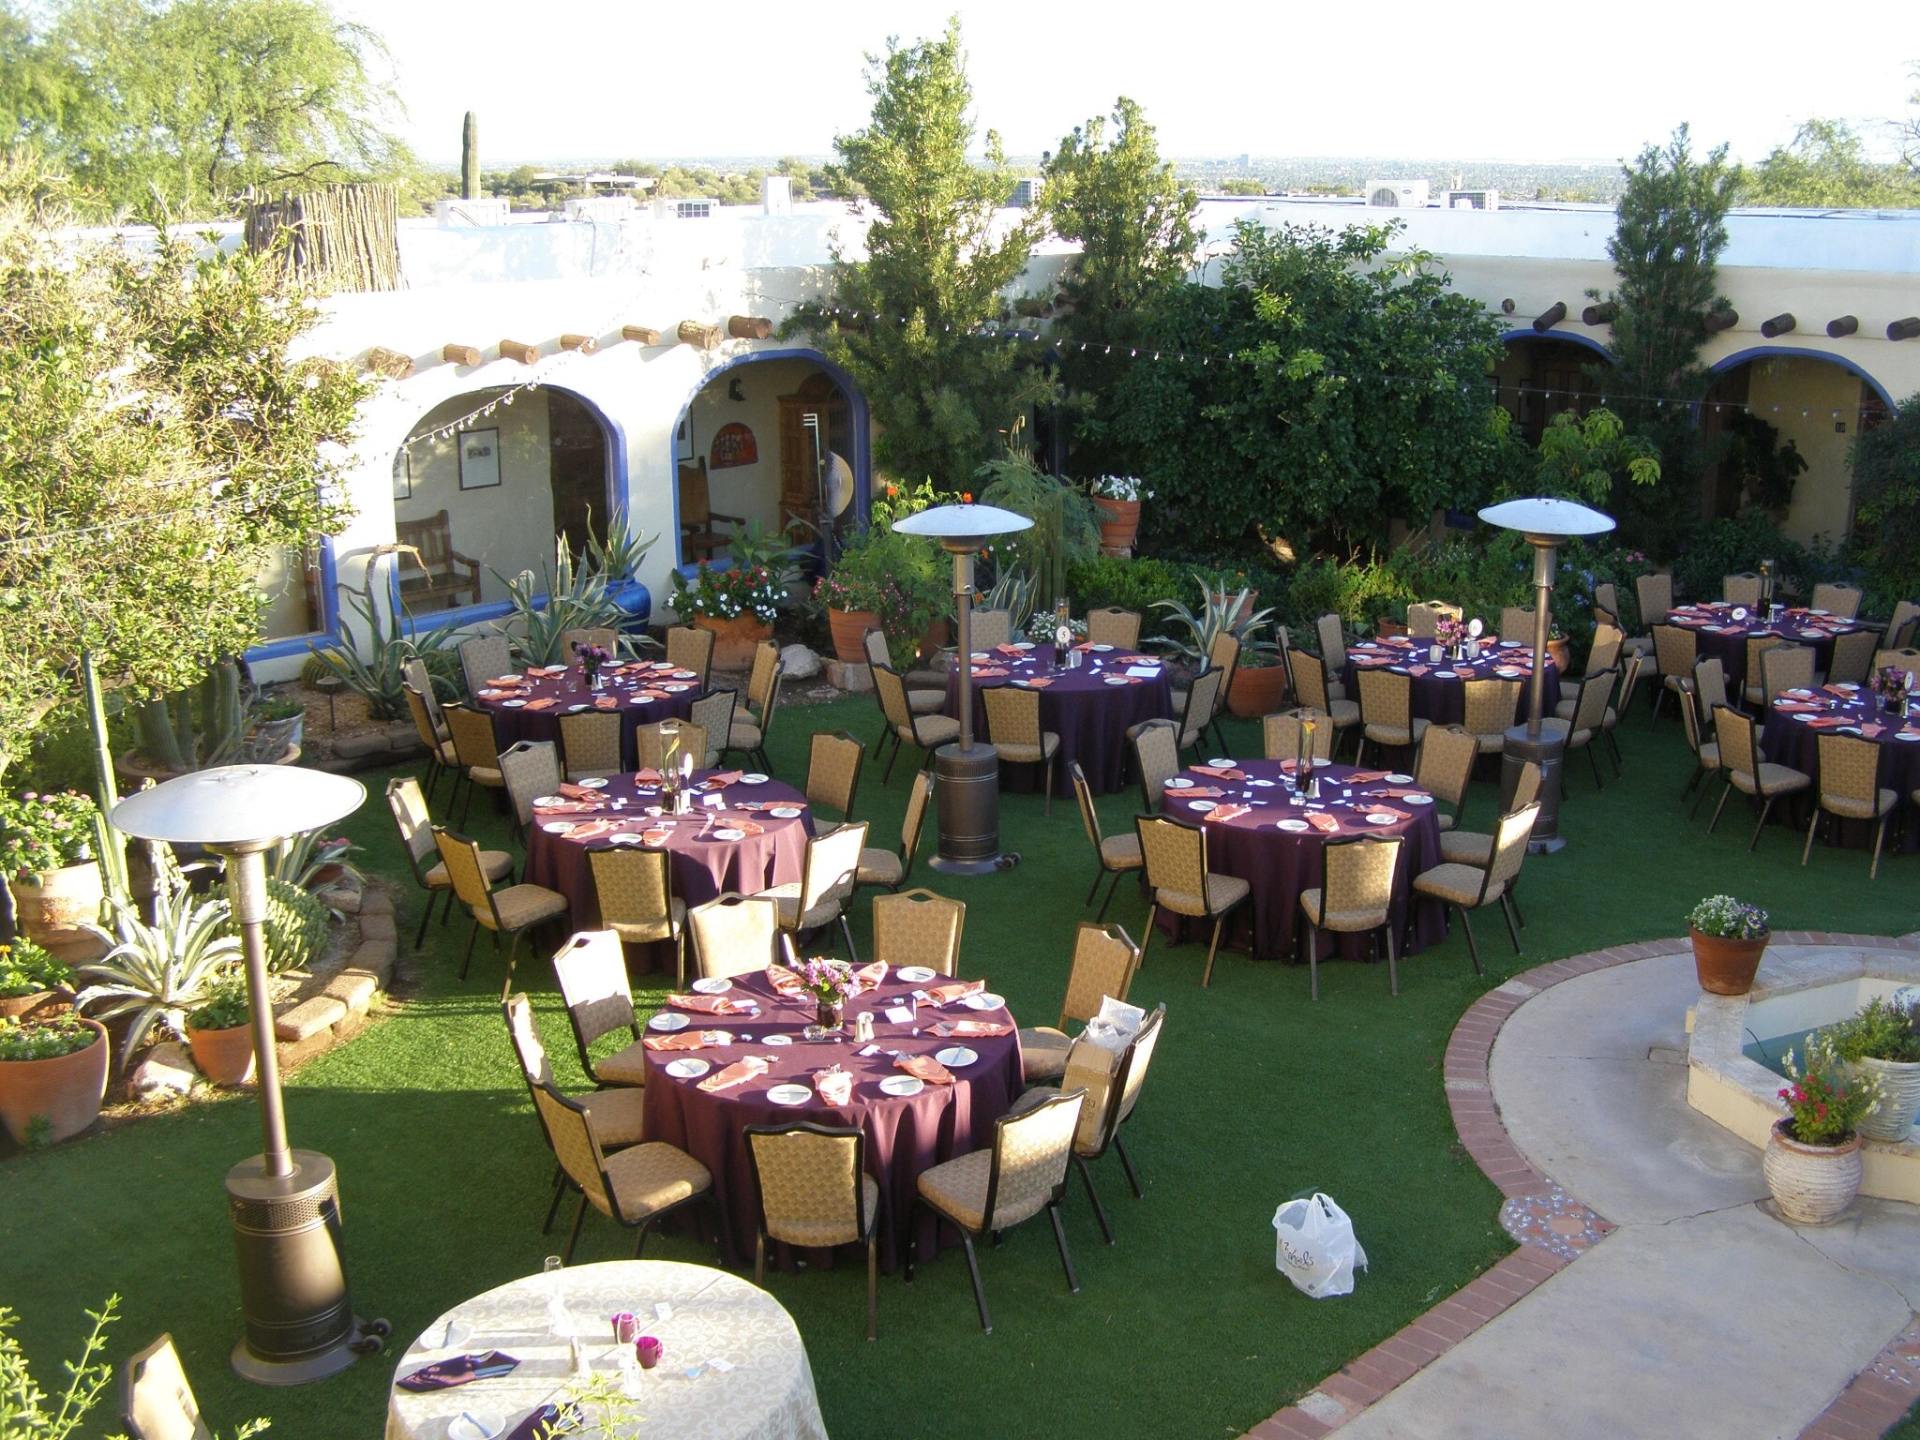 Party Reception 2 — Event Planning in Tucson, AZ